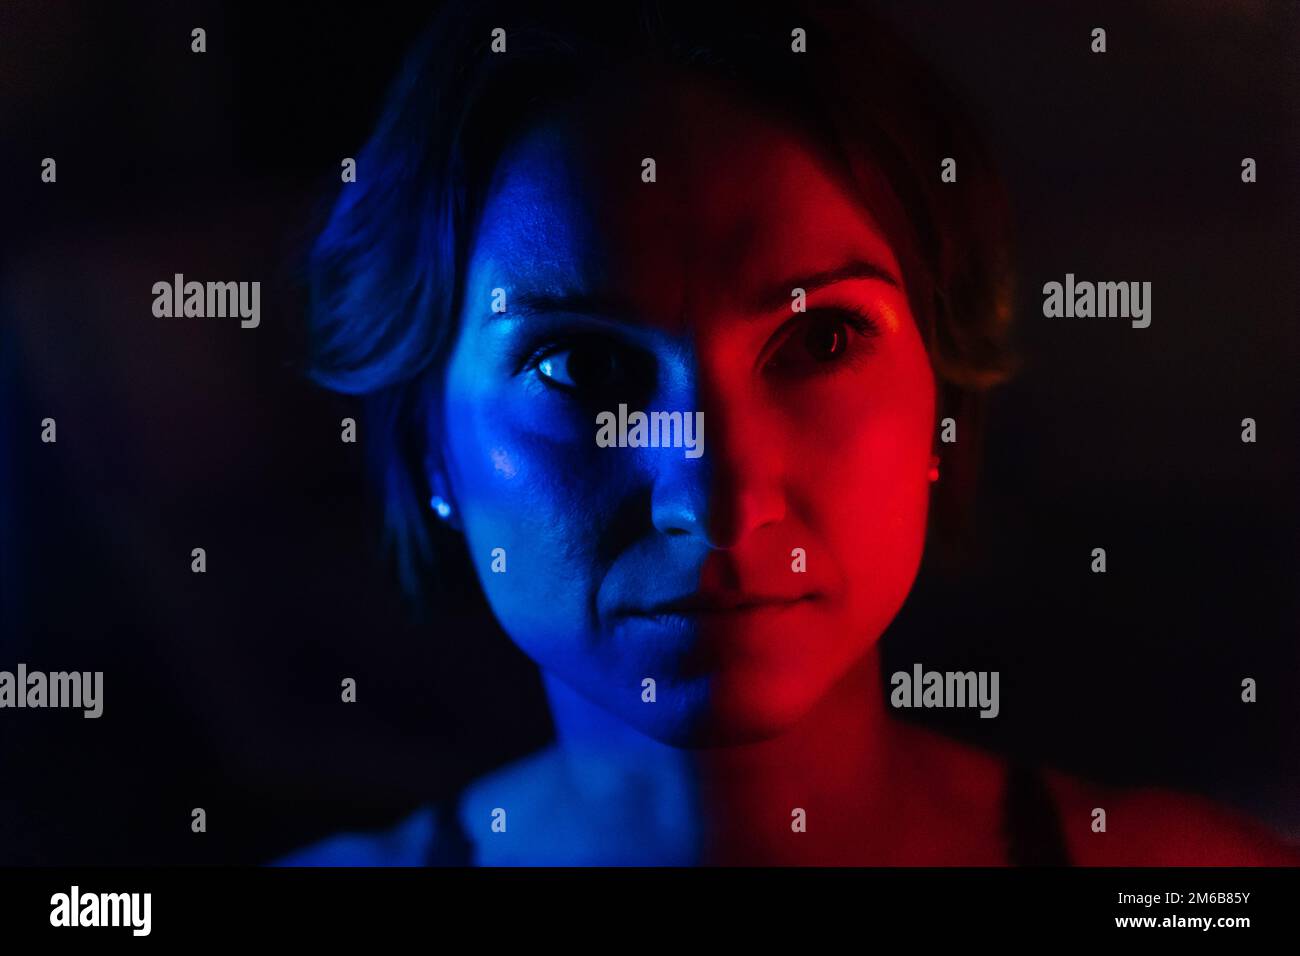 The face of a young woman in blue and red neon light on a dark background. Stock Photo